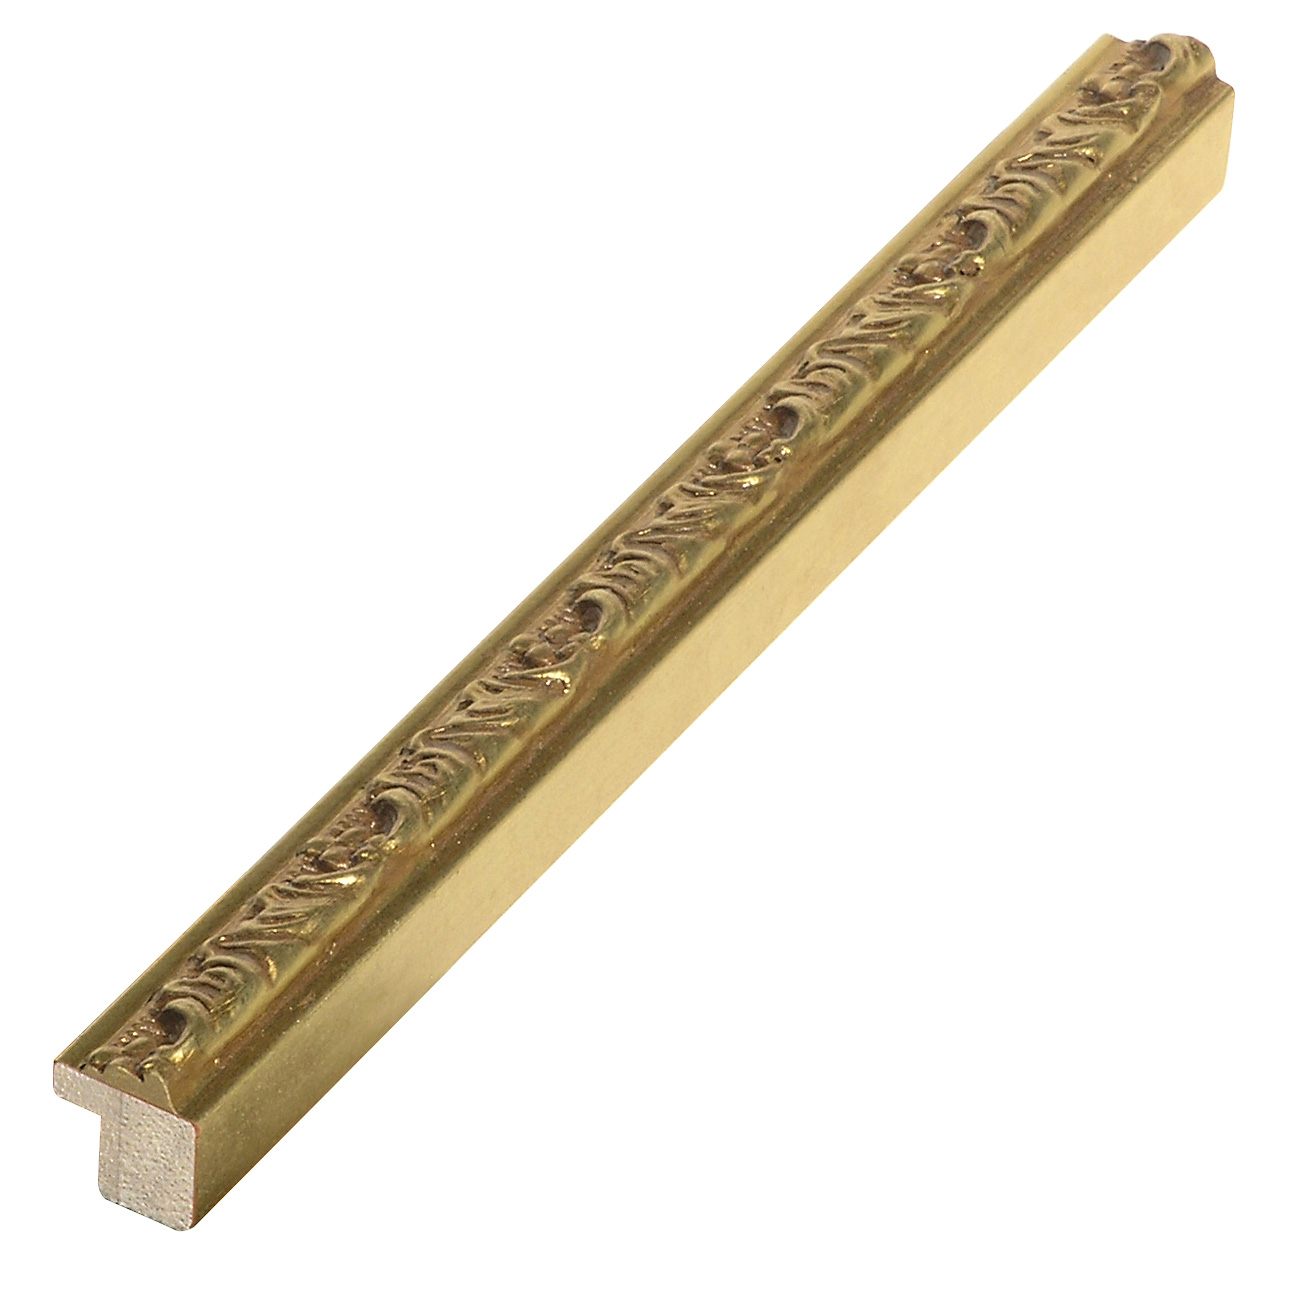 Moulding finger-jointed pine Width 16mm Height 17 - Gold, decorati